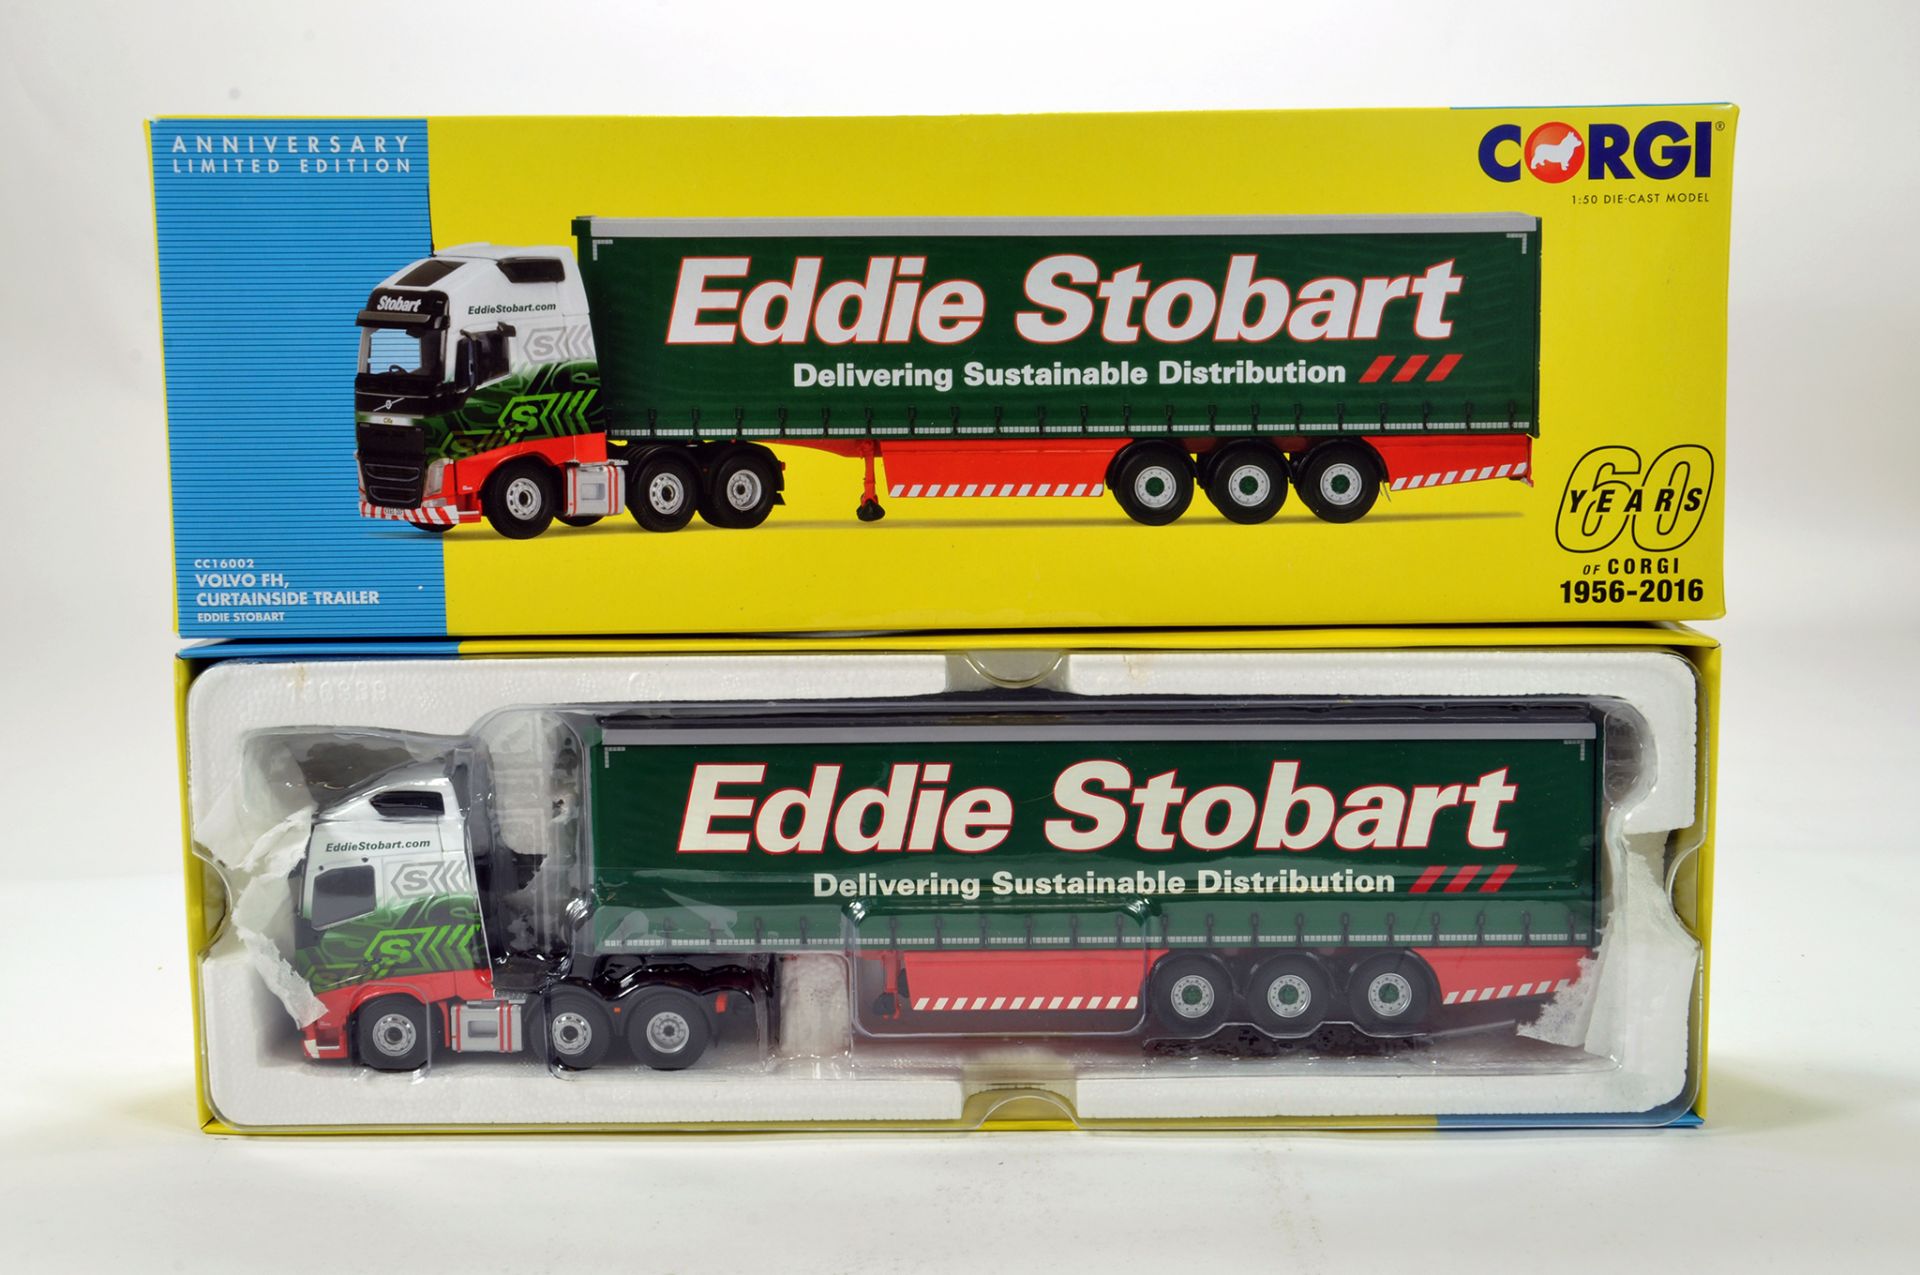 Corgi 1/50 diecast truck issue comprising No. CC16002 Vovlo FH Curtainside Trailer in livery of